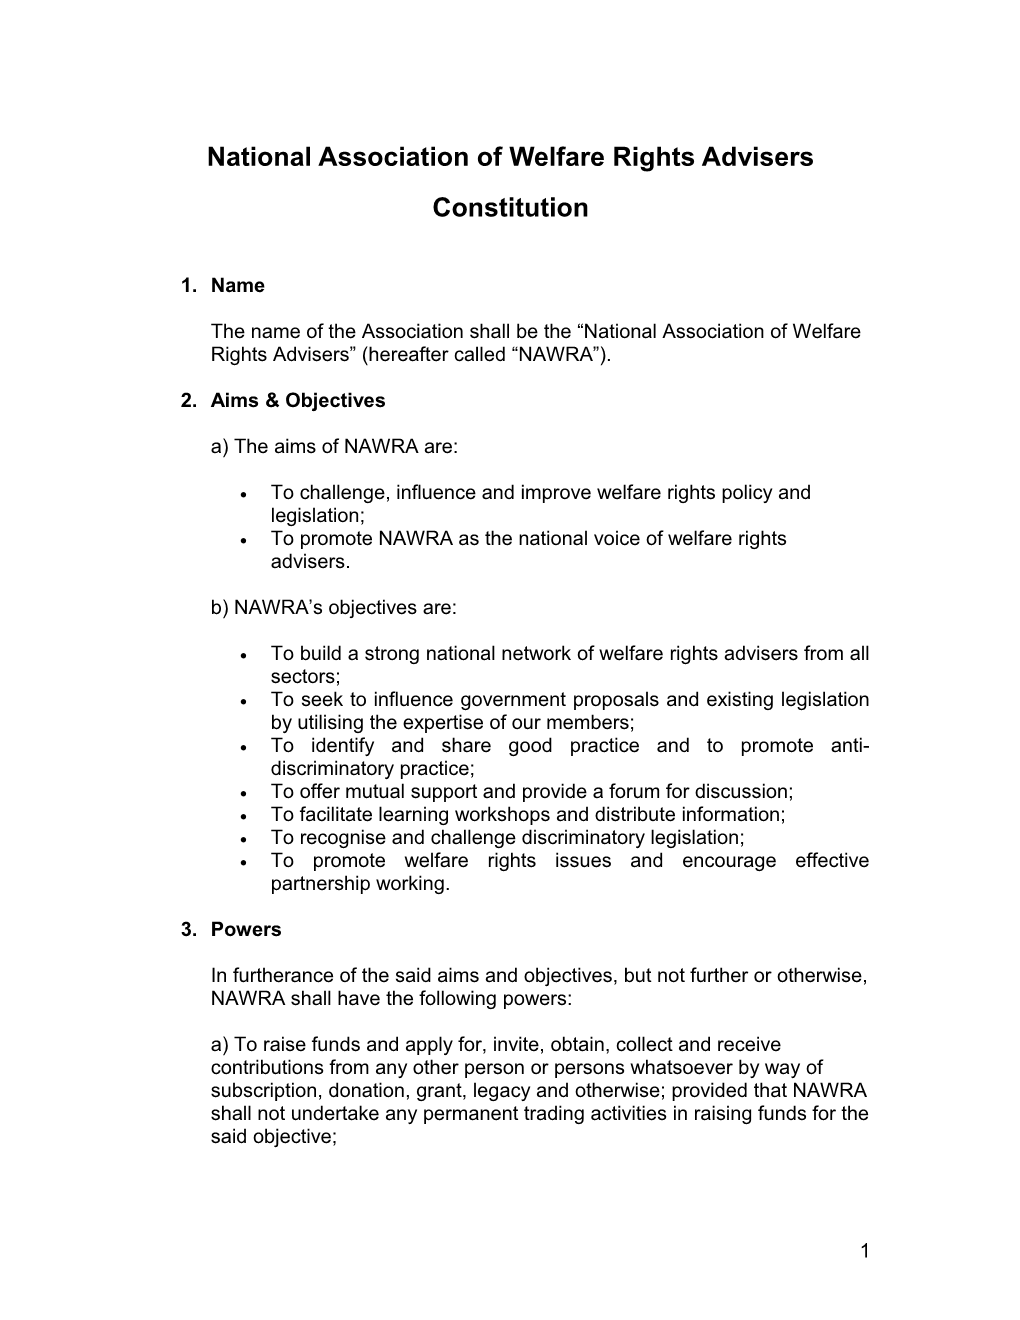 National Association of Welfare Rights Advisers